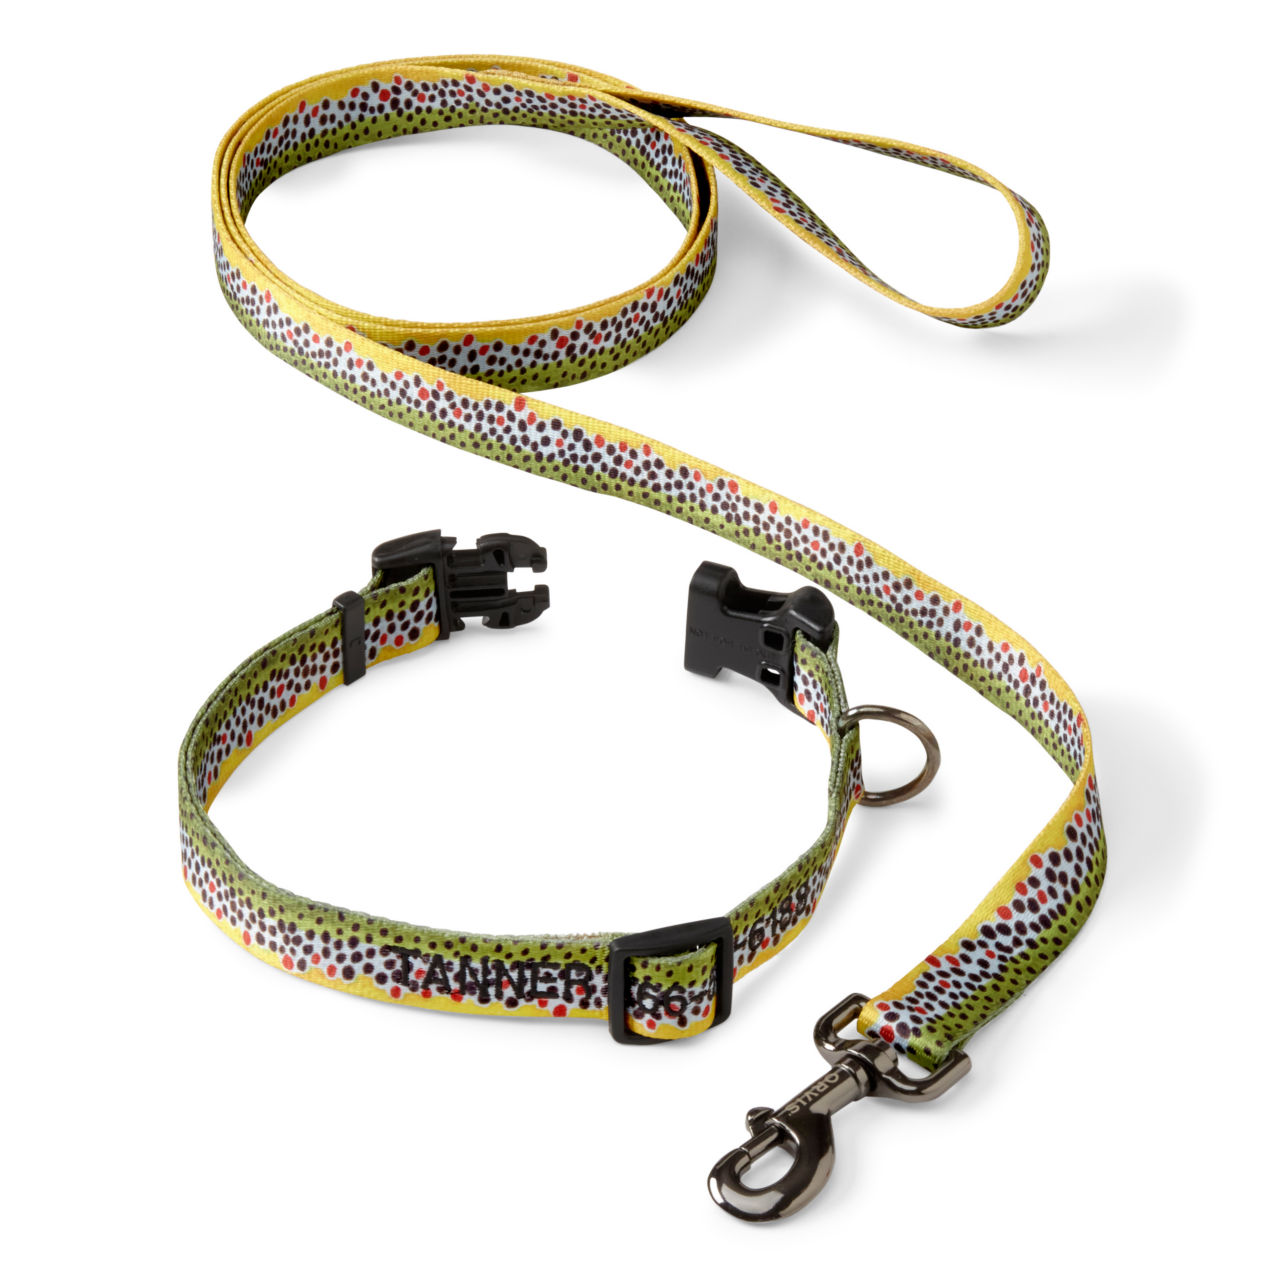 Personalized Adjustable Dog Collar with Leash - BROWN TROUT image number 0